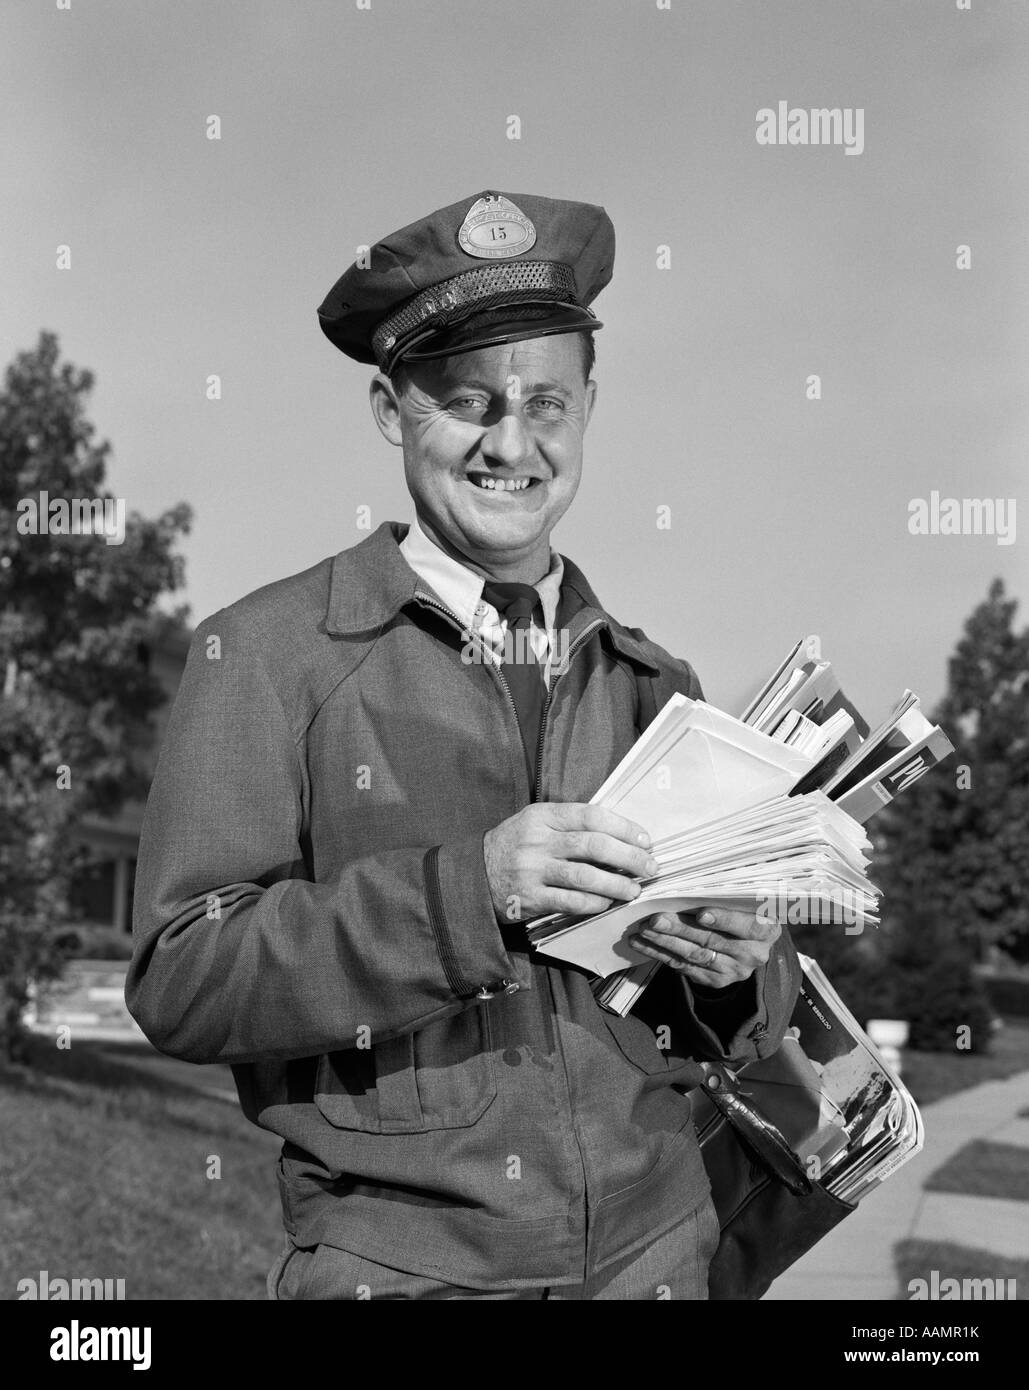 1960s SMILING MAILMAN OUTDOORS IN SUBURBAN NEIGHBORHOOD HOLDING LETTERS MAILBAG Stock Photo